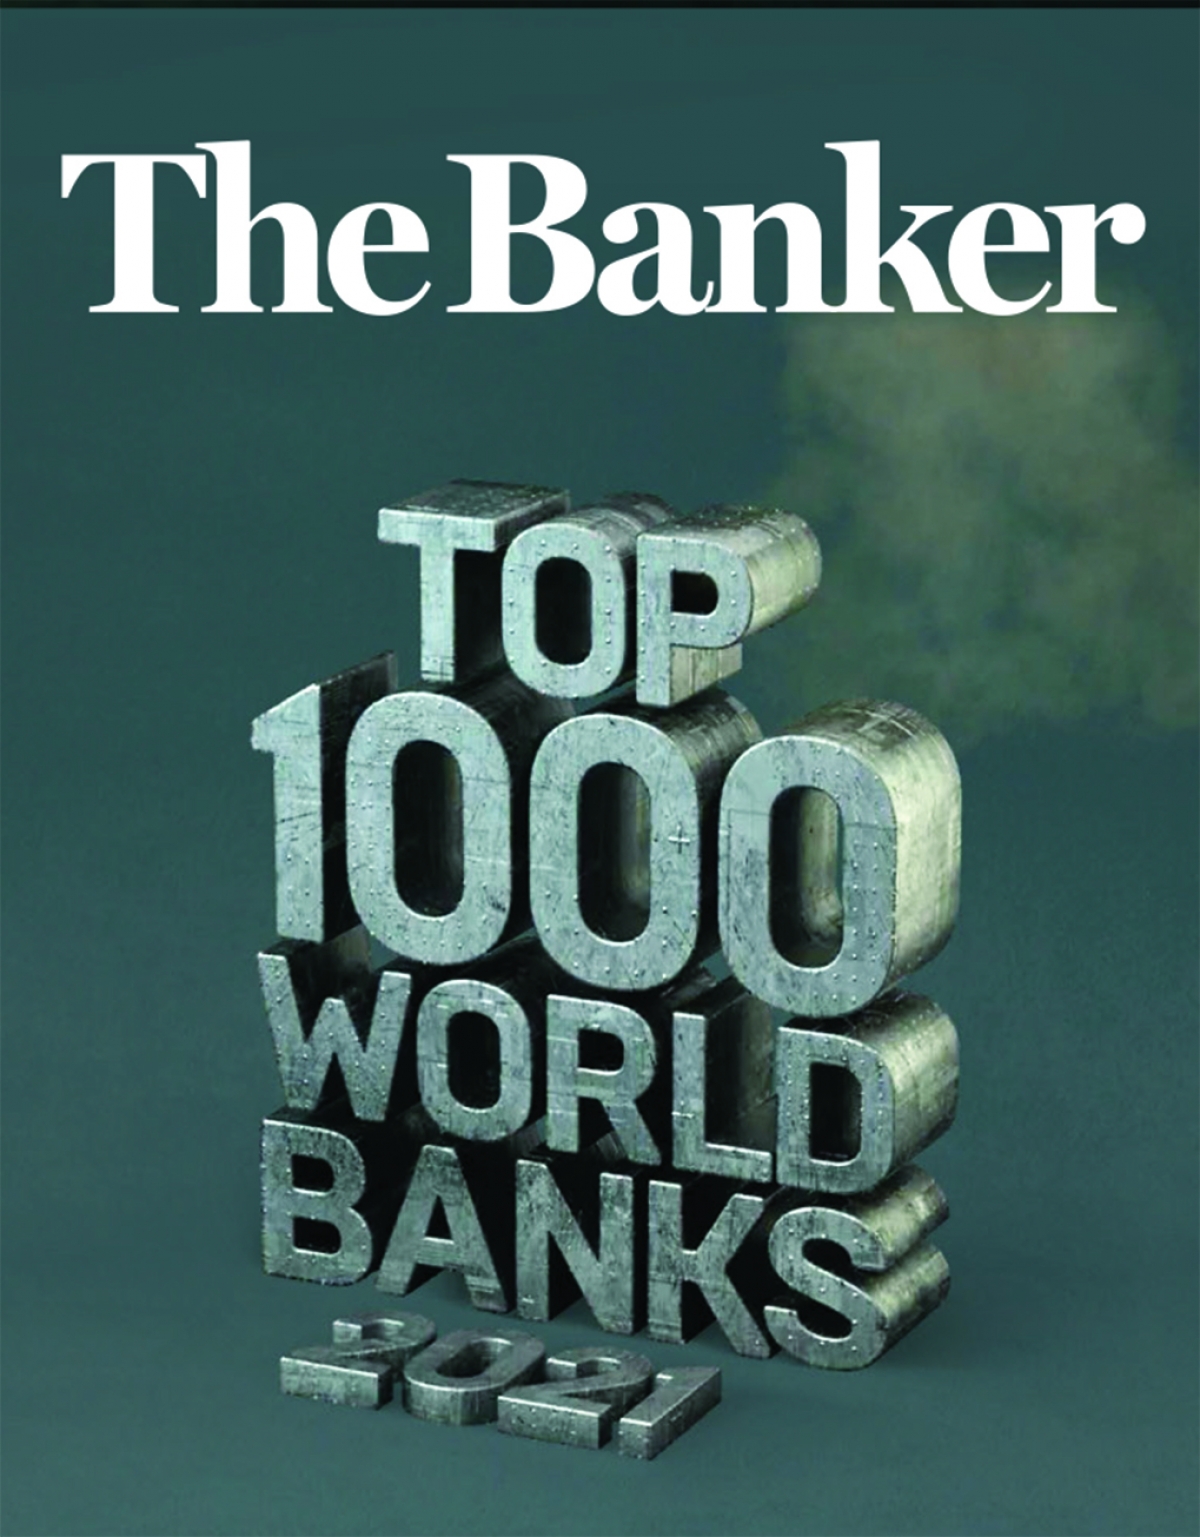 People’s Bank ranked amongst the world’s ‘Top 1000 Banks’ yet again